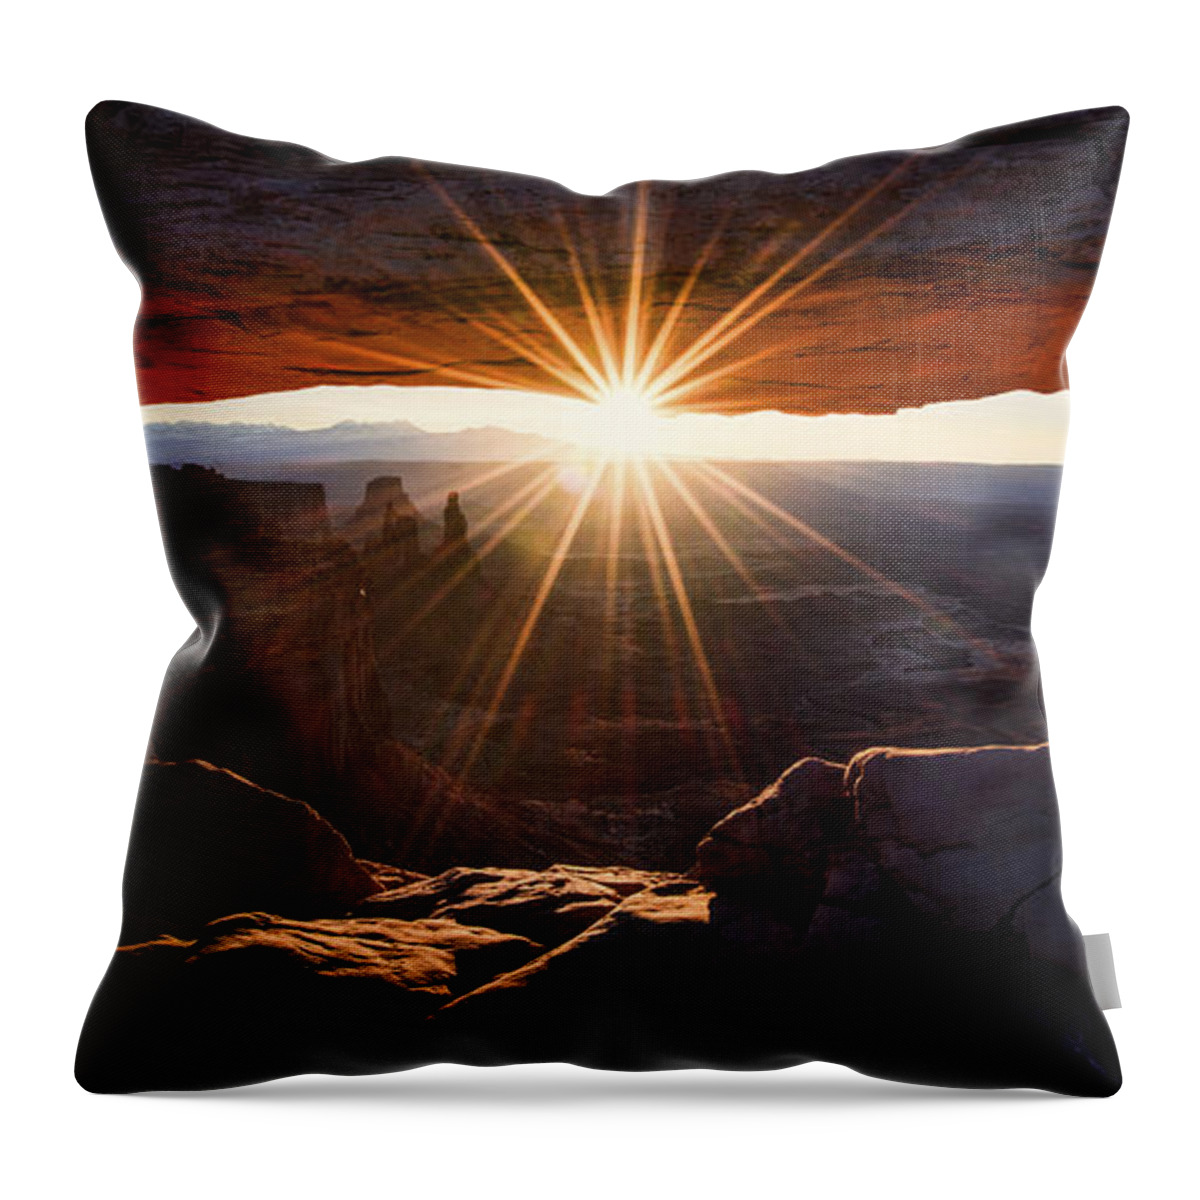 Mesa Glow Throw Pillow featuring the photograph Mesa Glow by Chad Dutson